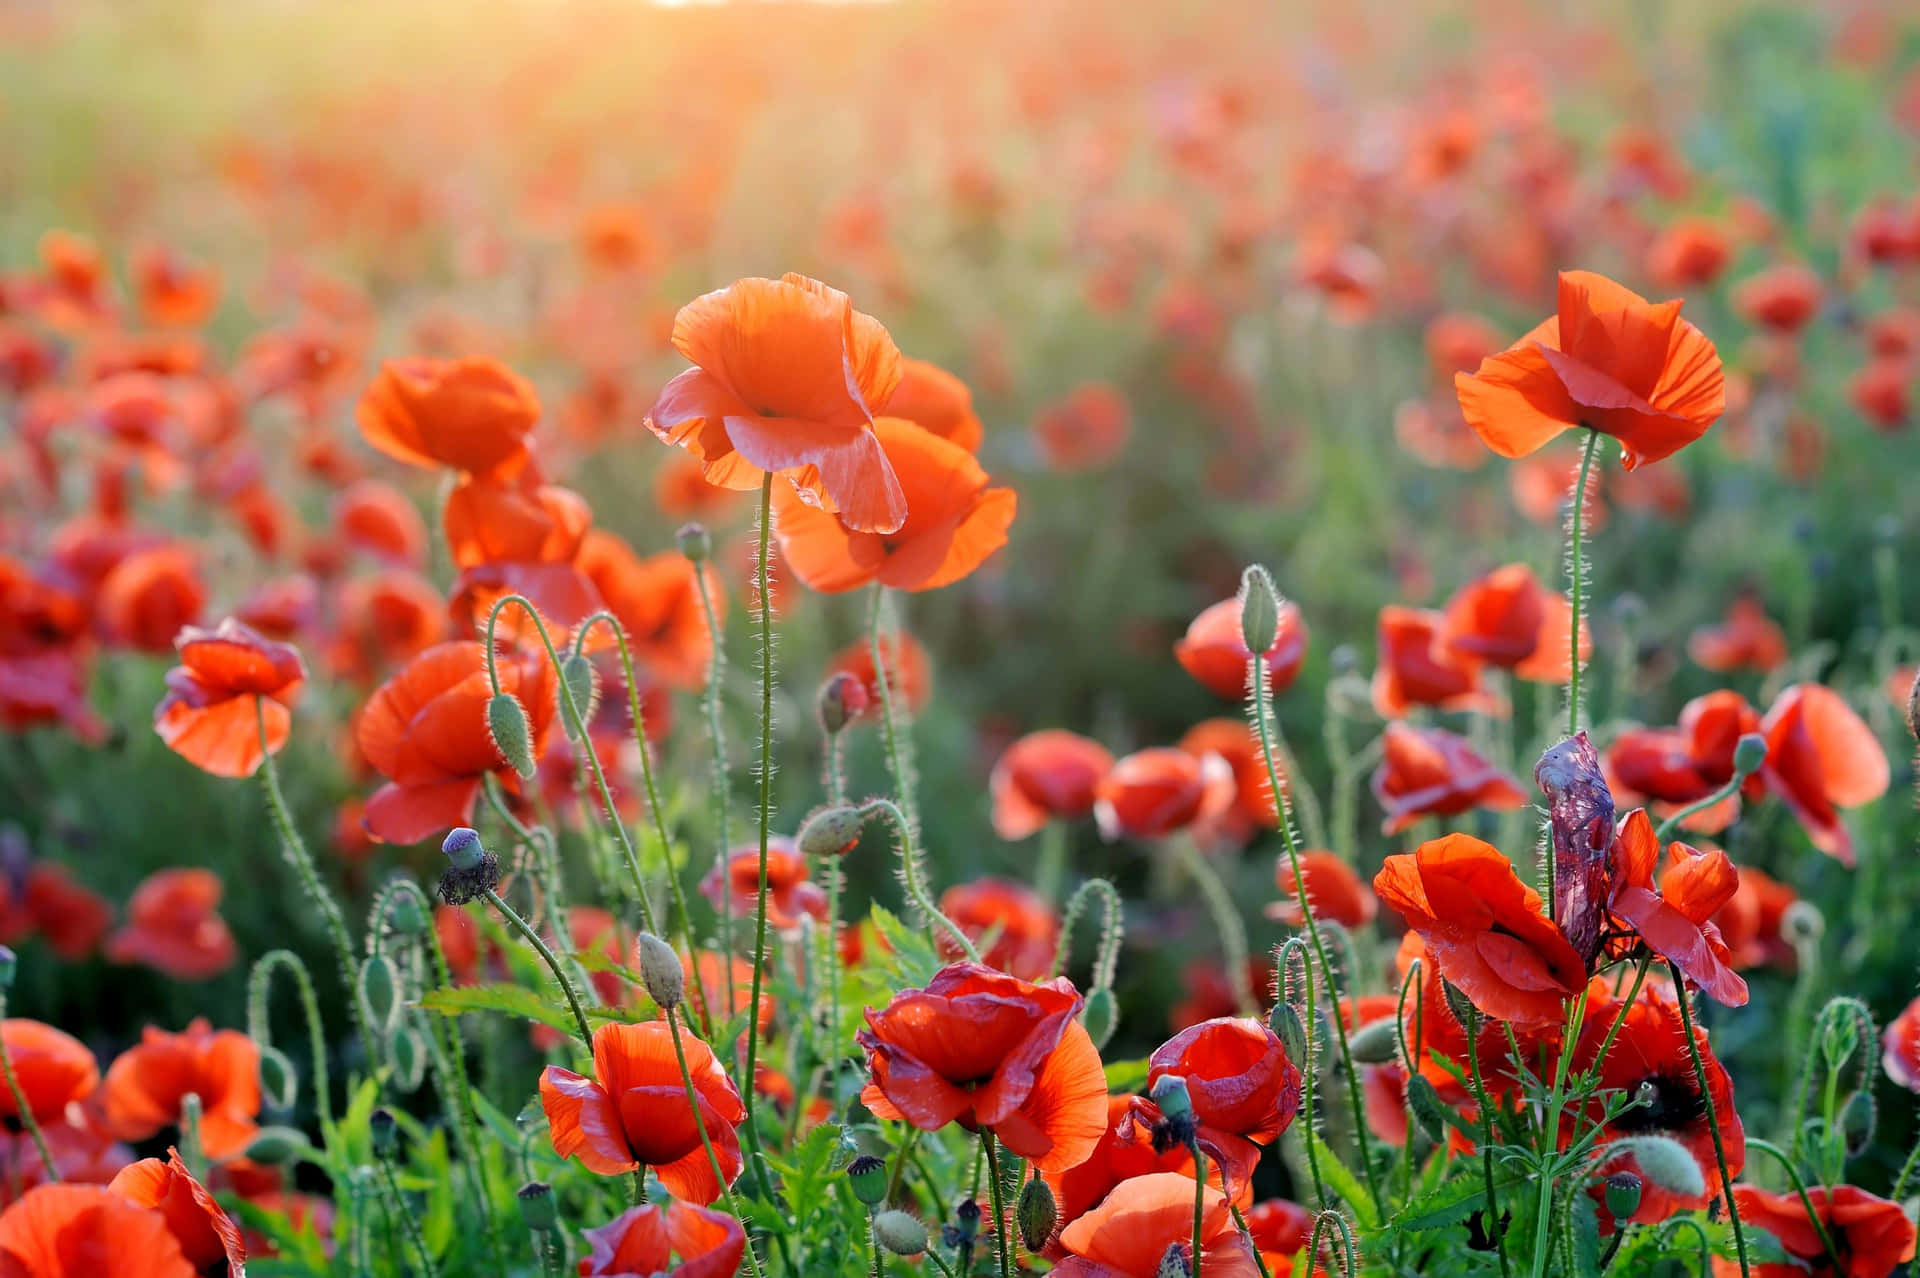 A field of brilliant Poppies in the bright sunshine.